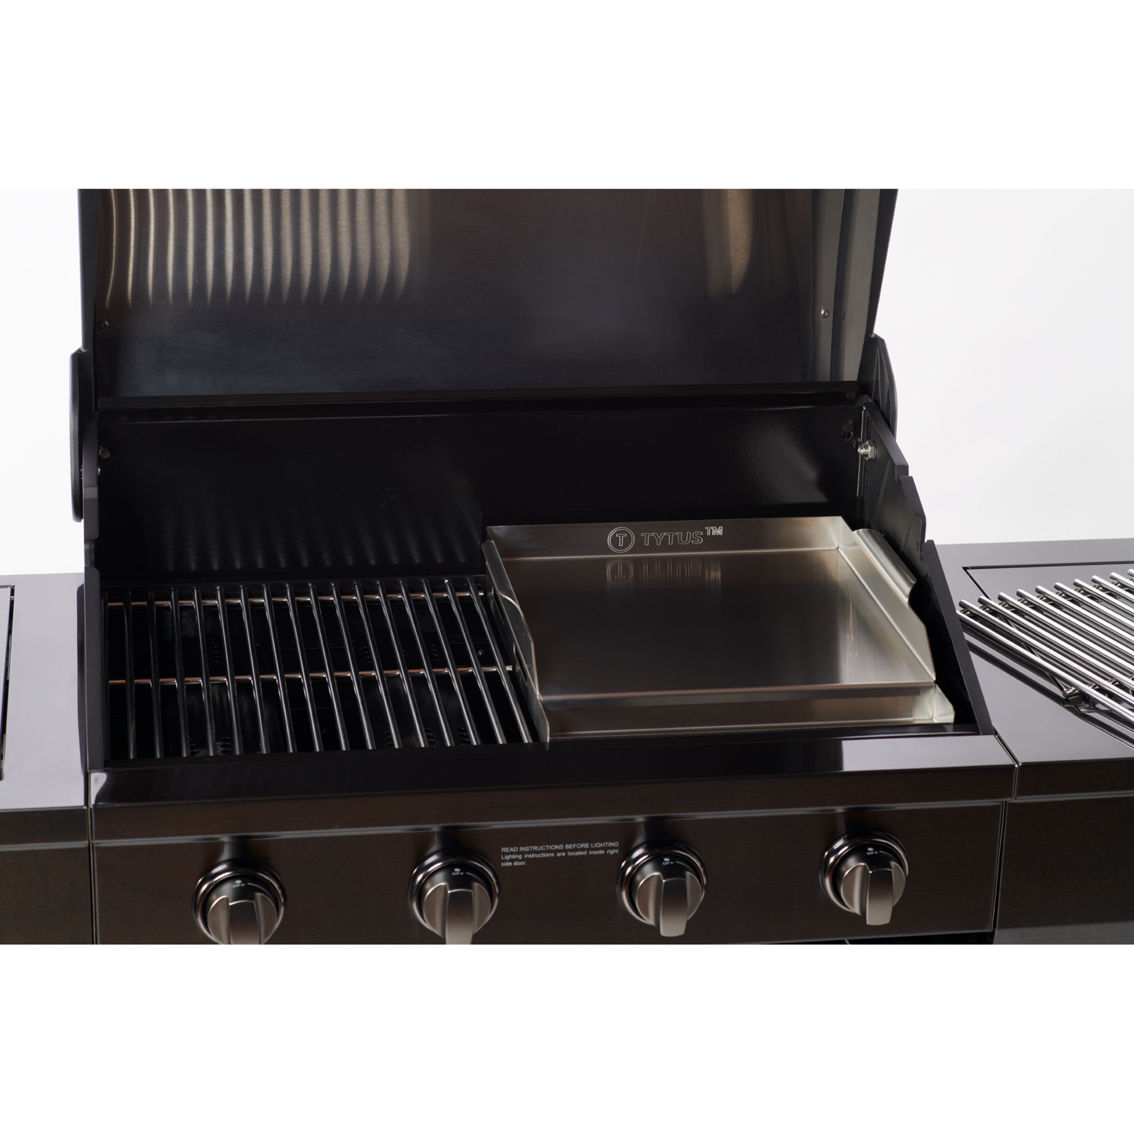 TYTUS Stainless Steel Griddle - Image 3 of 5